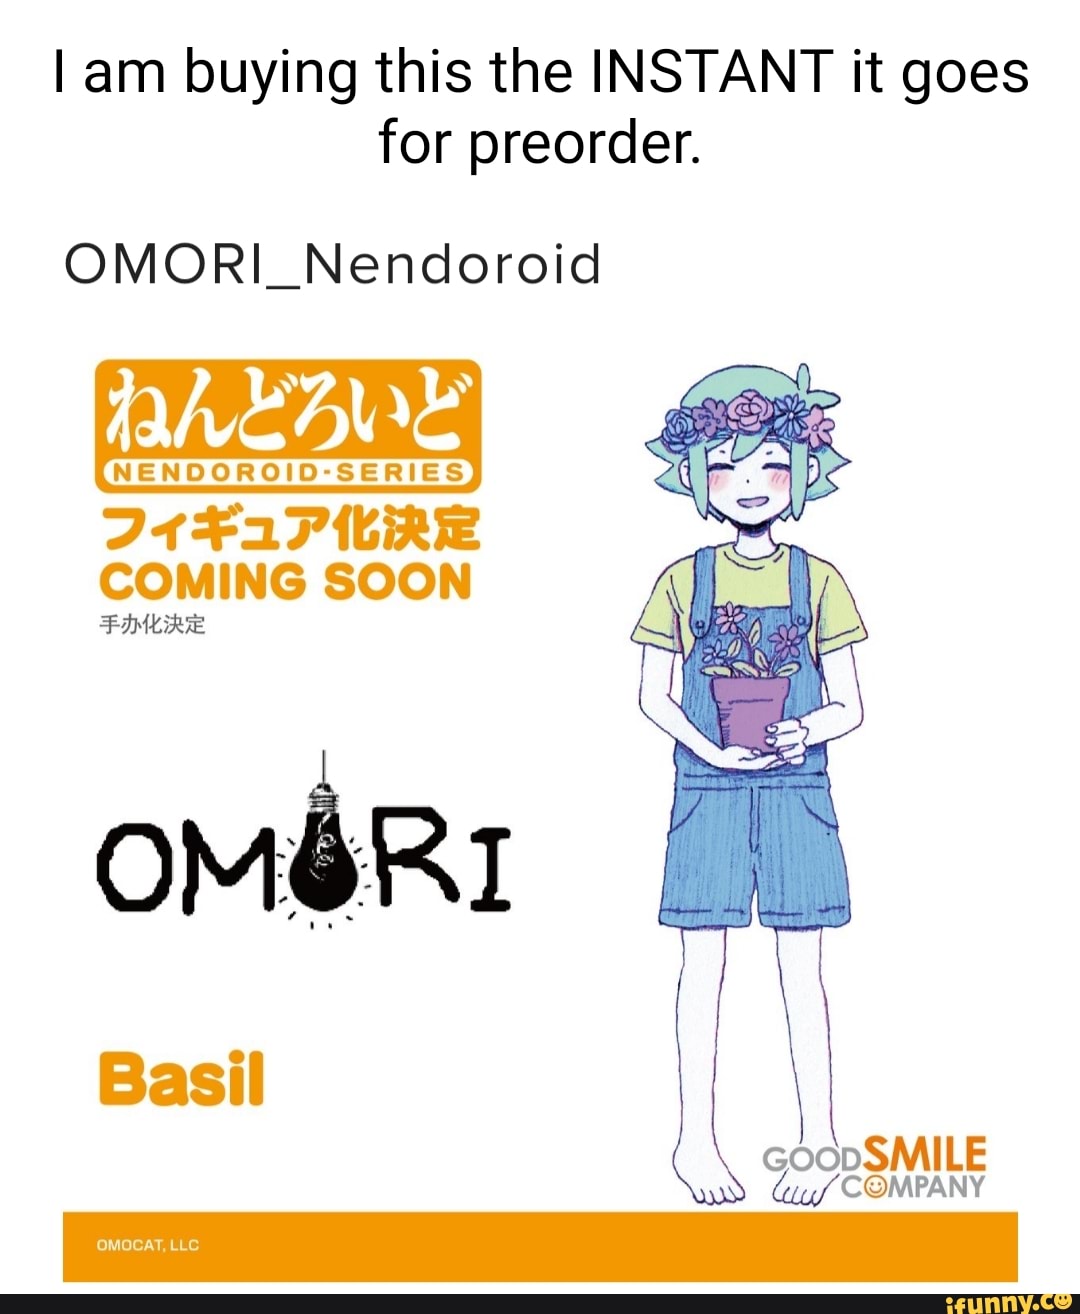 Am buying this the INSTANT it goes for preorder. OMORI_Nendoroid